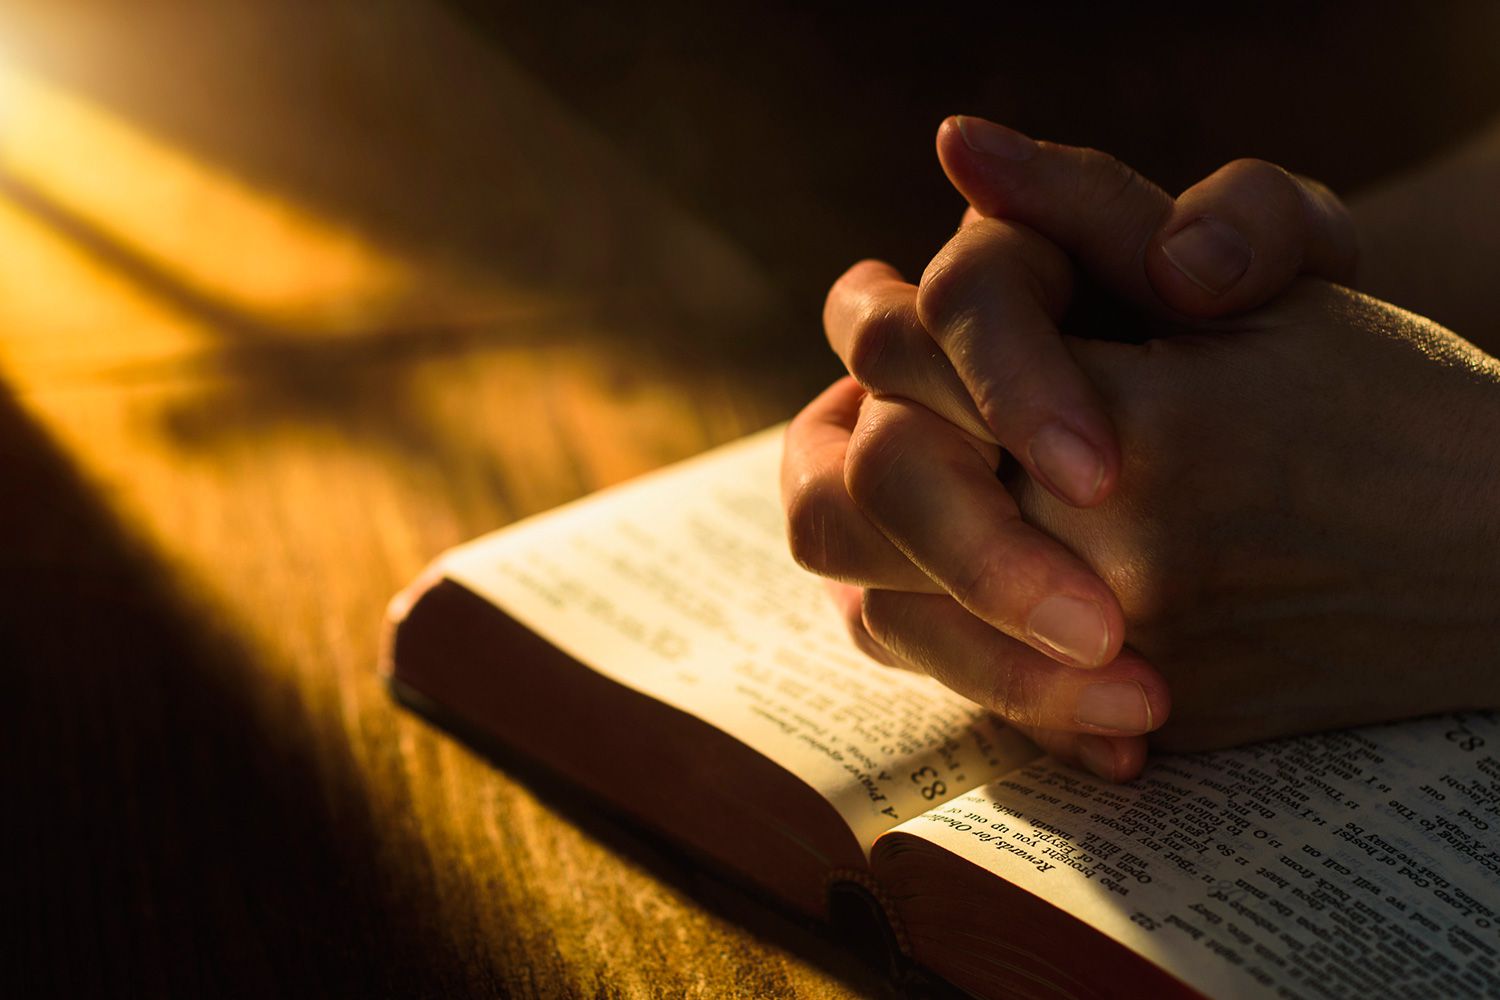 Hands praying on a bible